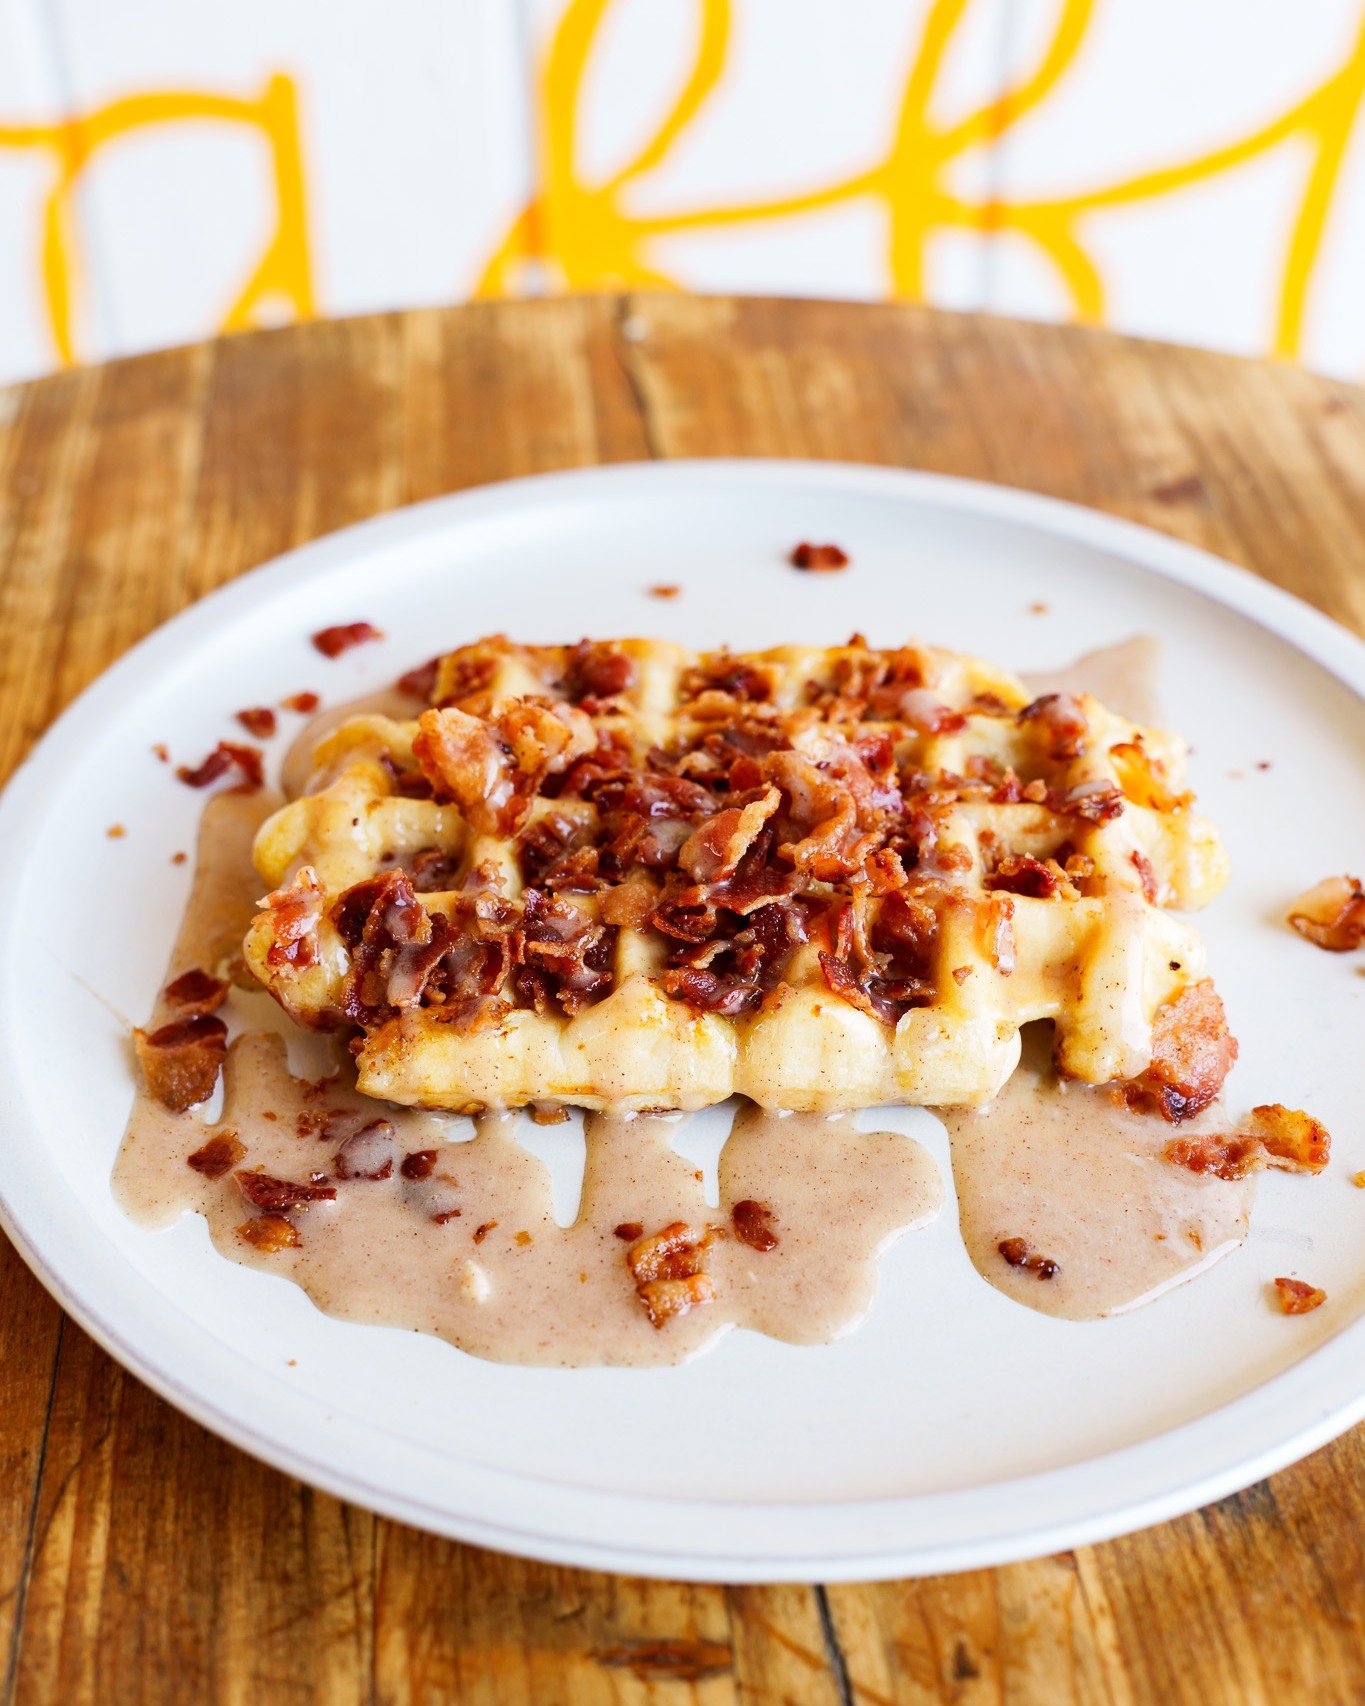 The month of May at the Waffee Station means all things Maple

🧇Maple Bacon Waffle
🥤Caramel Frappuccino
🍟Maple Waffle Fries

Tag us when you try one of these items &mdash; especially the Maple Waffles Fries👀 PREPARE YOURSELF🤭

#waffeestation #nc